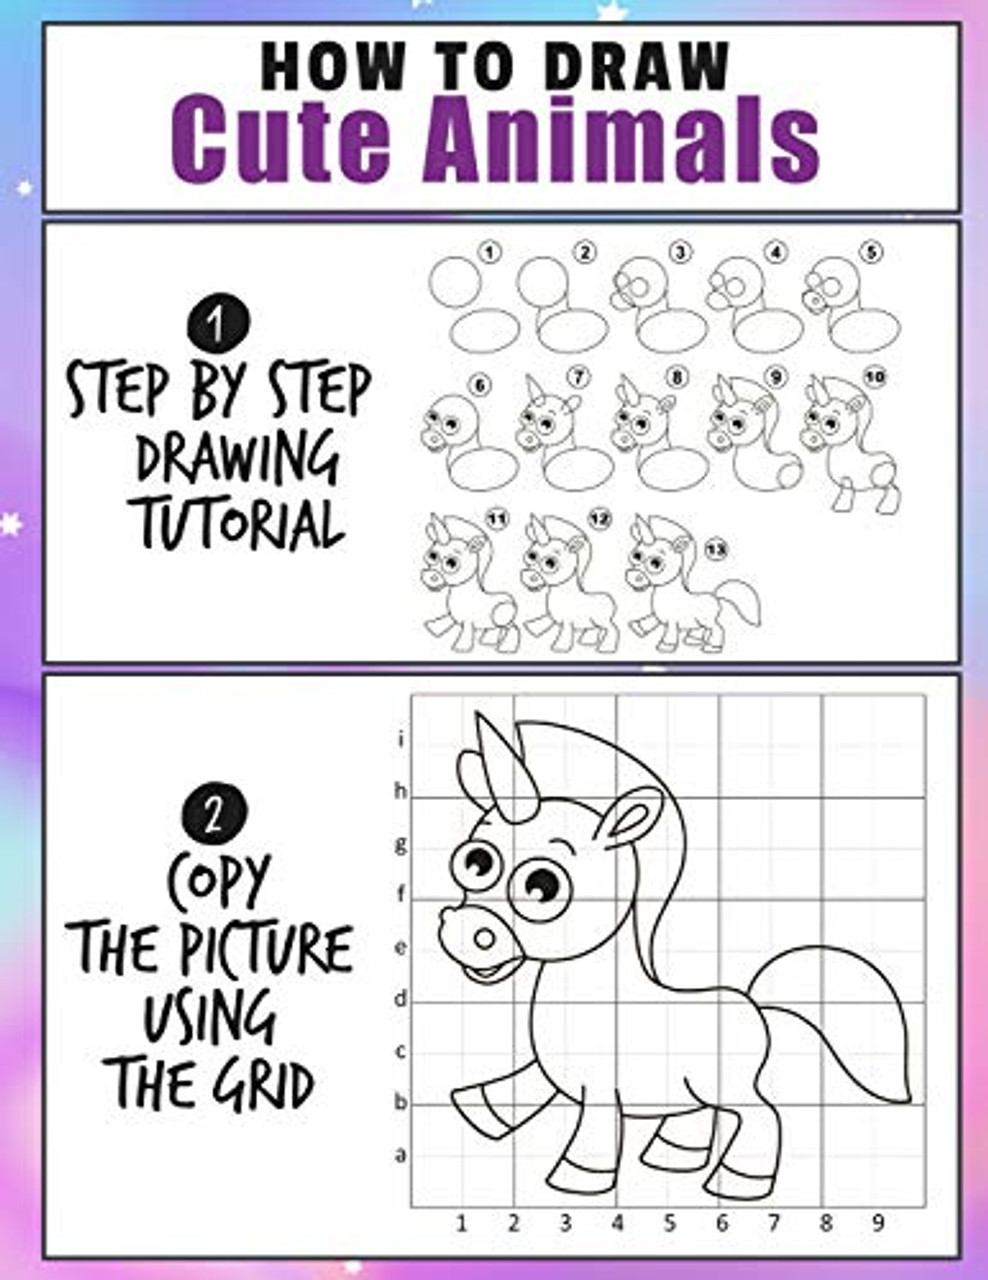 Drawing for kids 6 - 8 (Grid drawing for kids - Volume 3): Buy